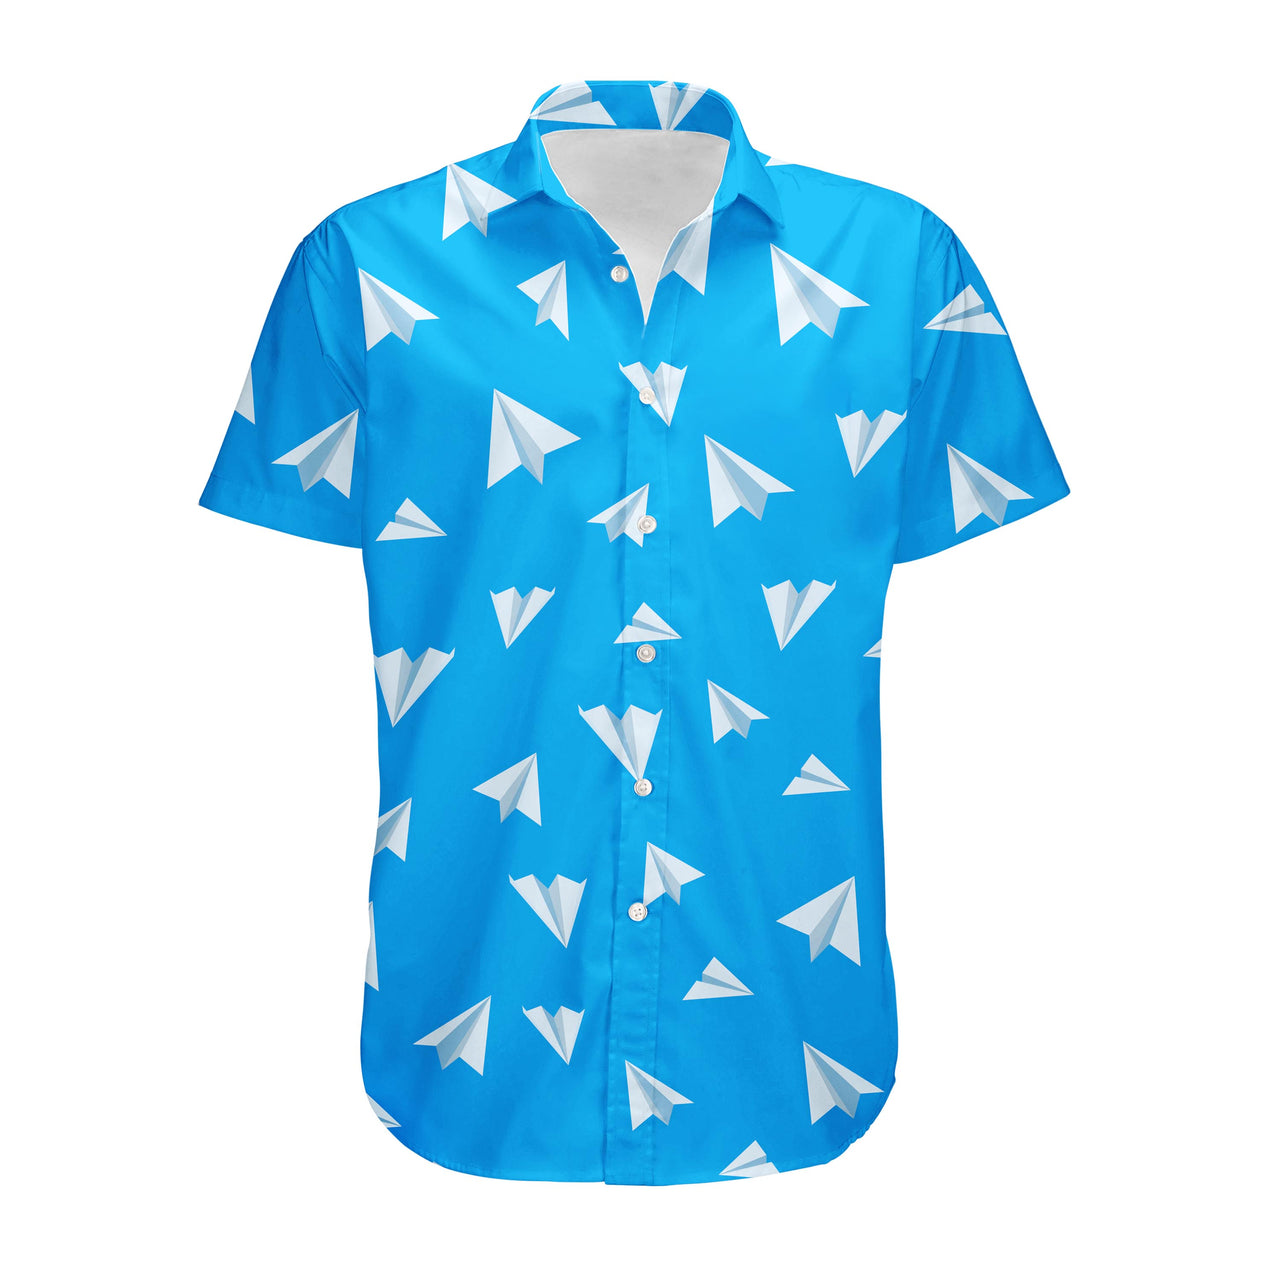 Paper Airplanes Designed 3D Shirts